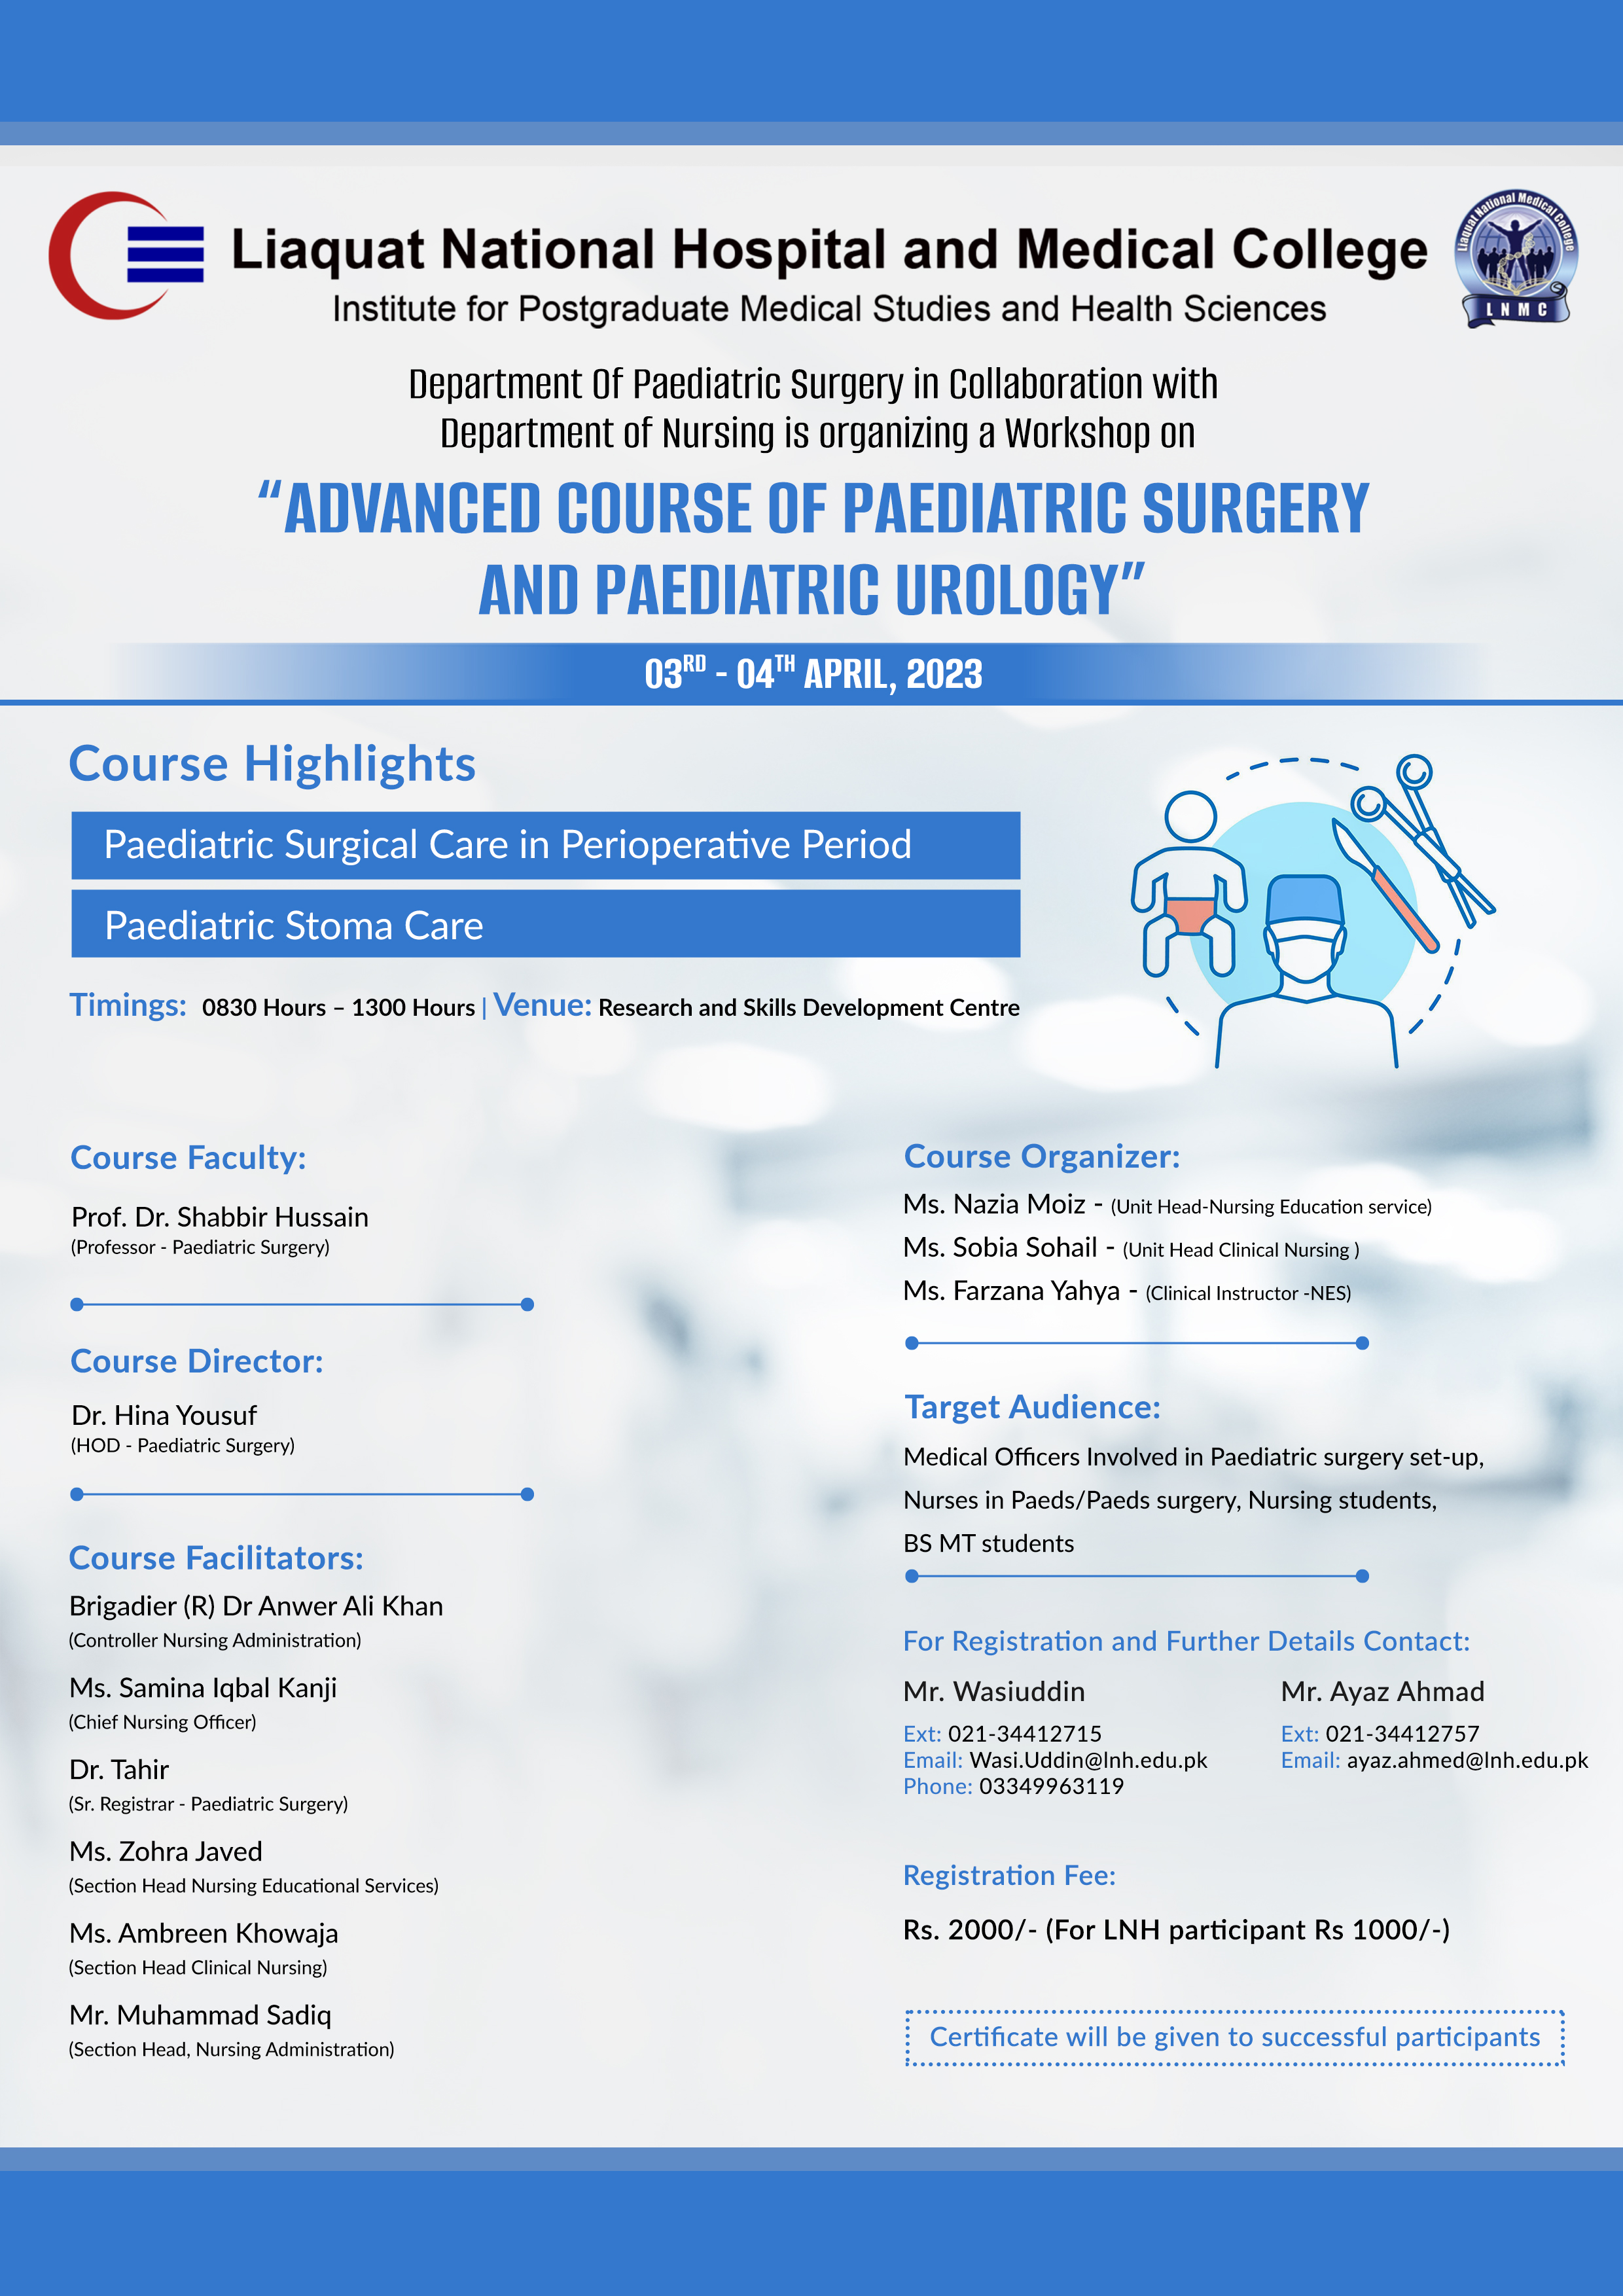 Advanced Course of Paediatric Surgery and Paediatric Urology